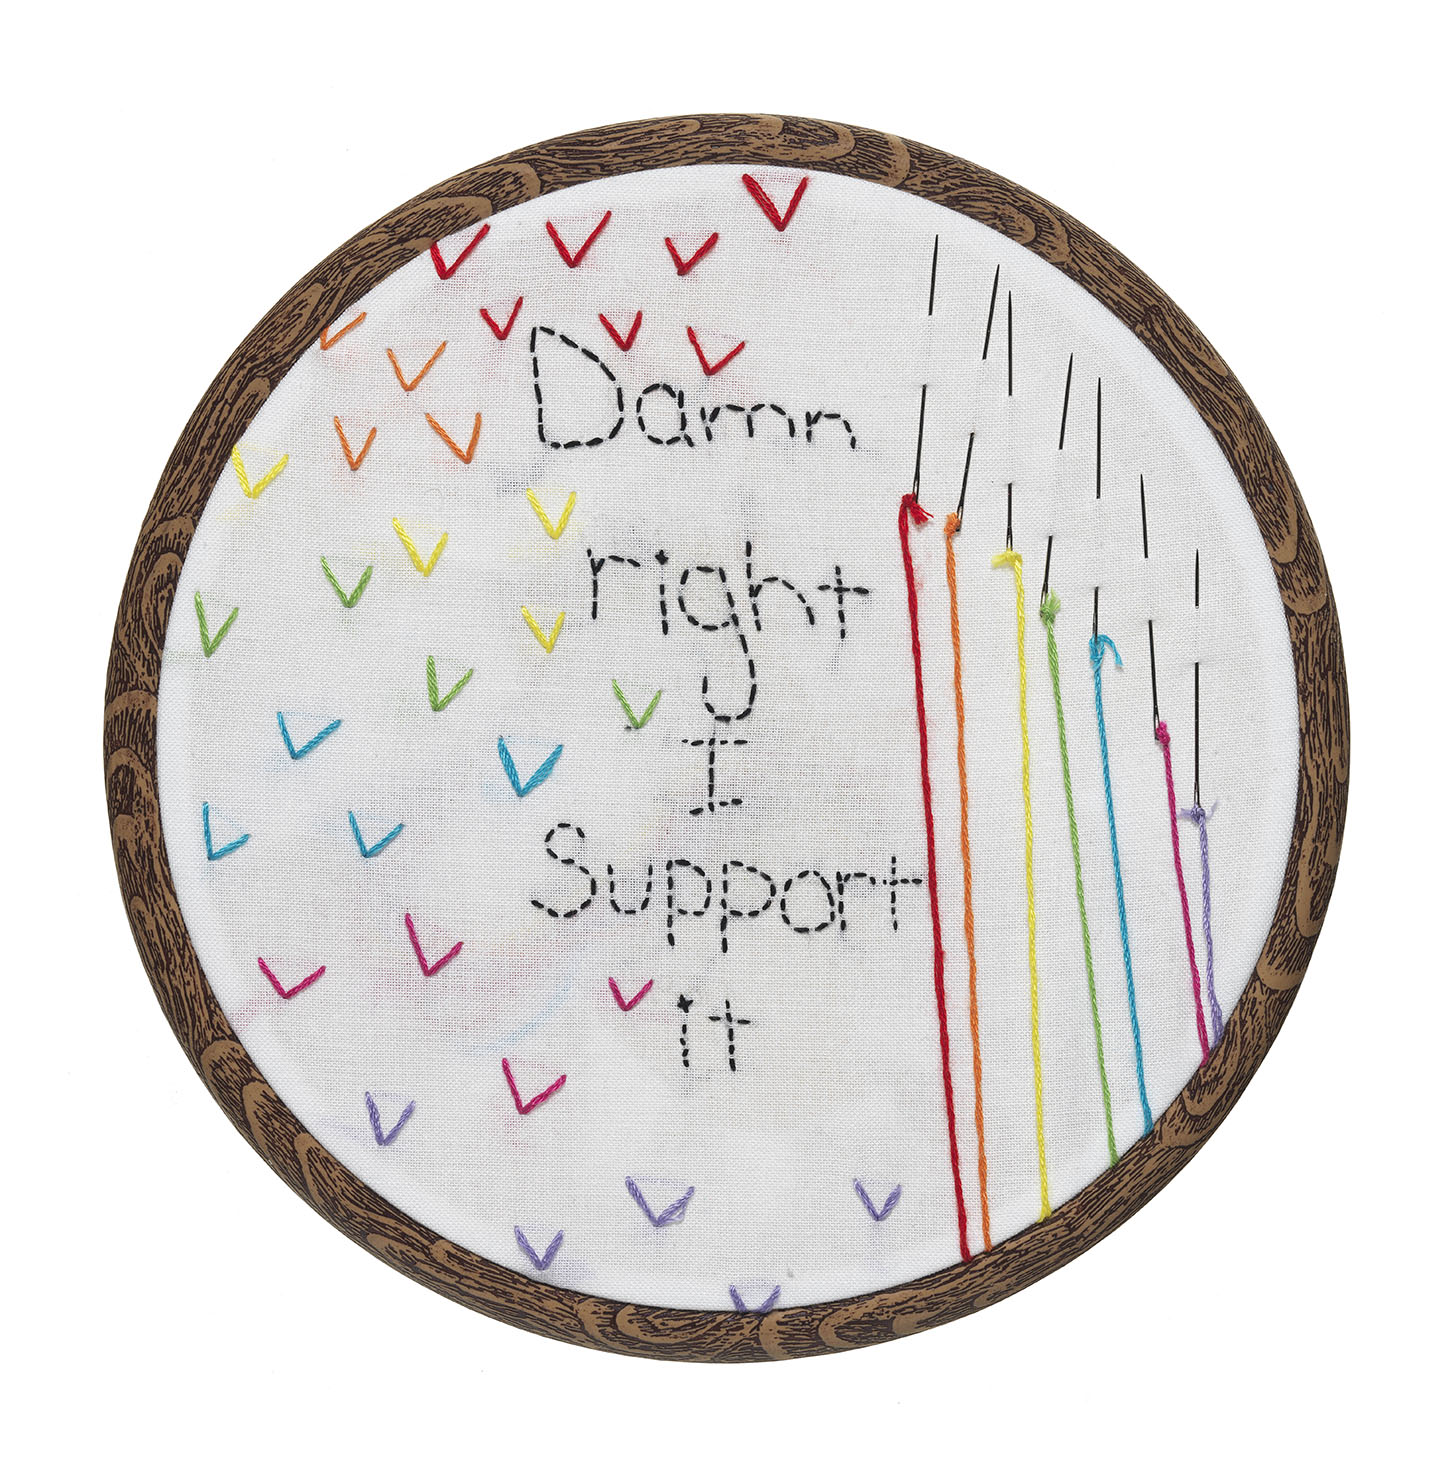 Embroidery hoop with white fabric embroidered with rainbow-coloured thread with text reading Damn right I support it